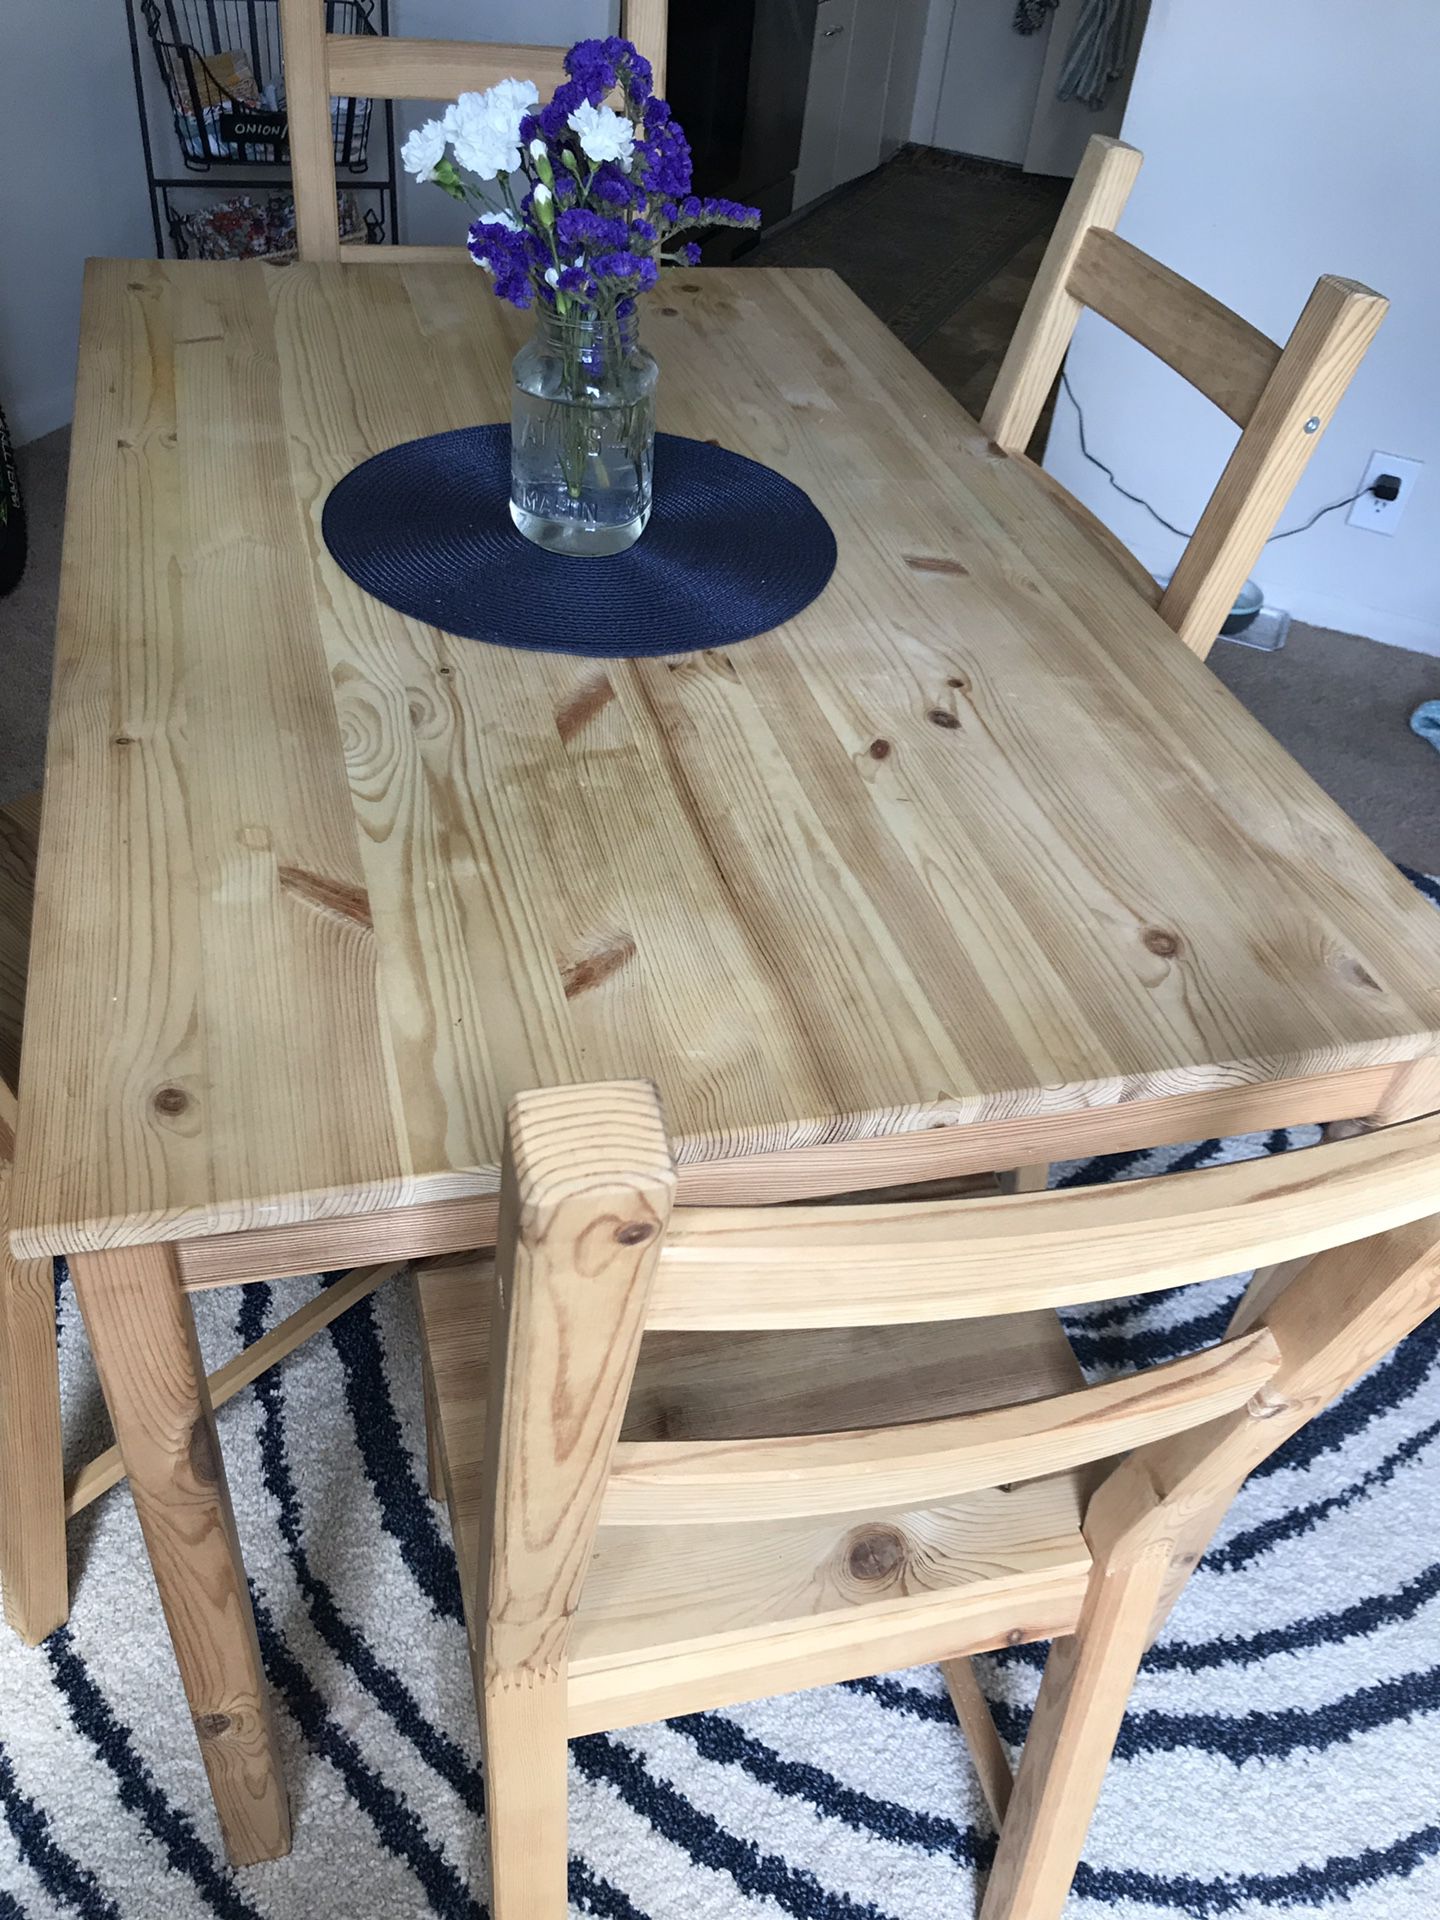 Ikea ‘Ingo ‘natural wood kitchen table and 4 chairs $ 29 each original price unstained)